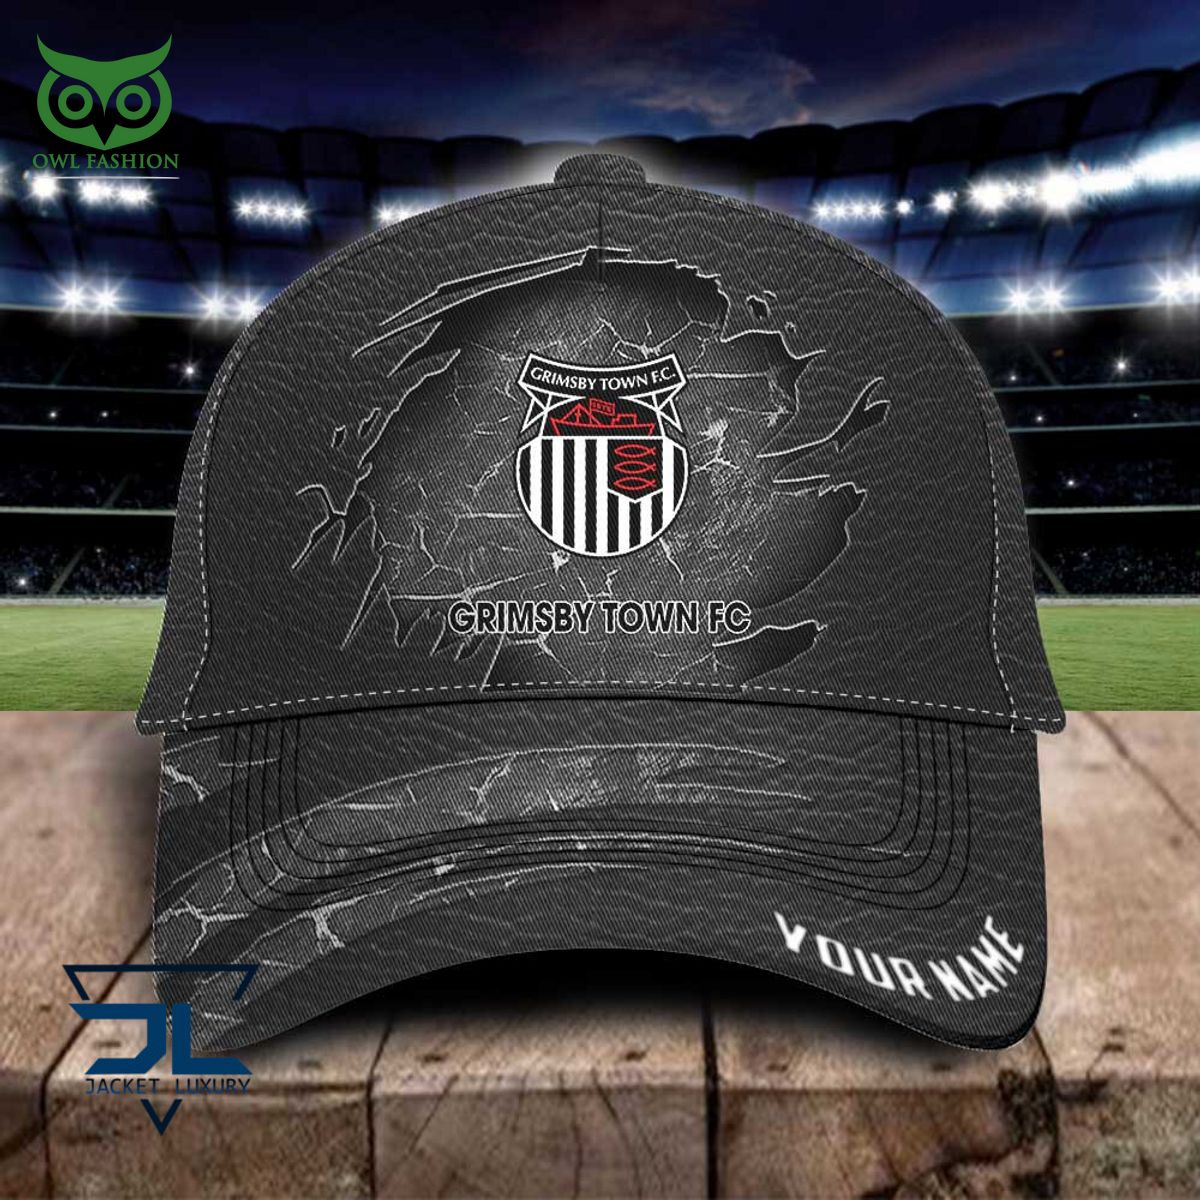 grimsby town efl personalized leather classic cap 1 dBpgB